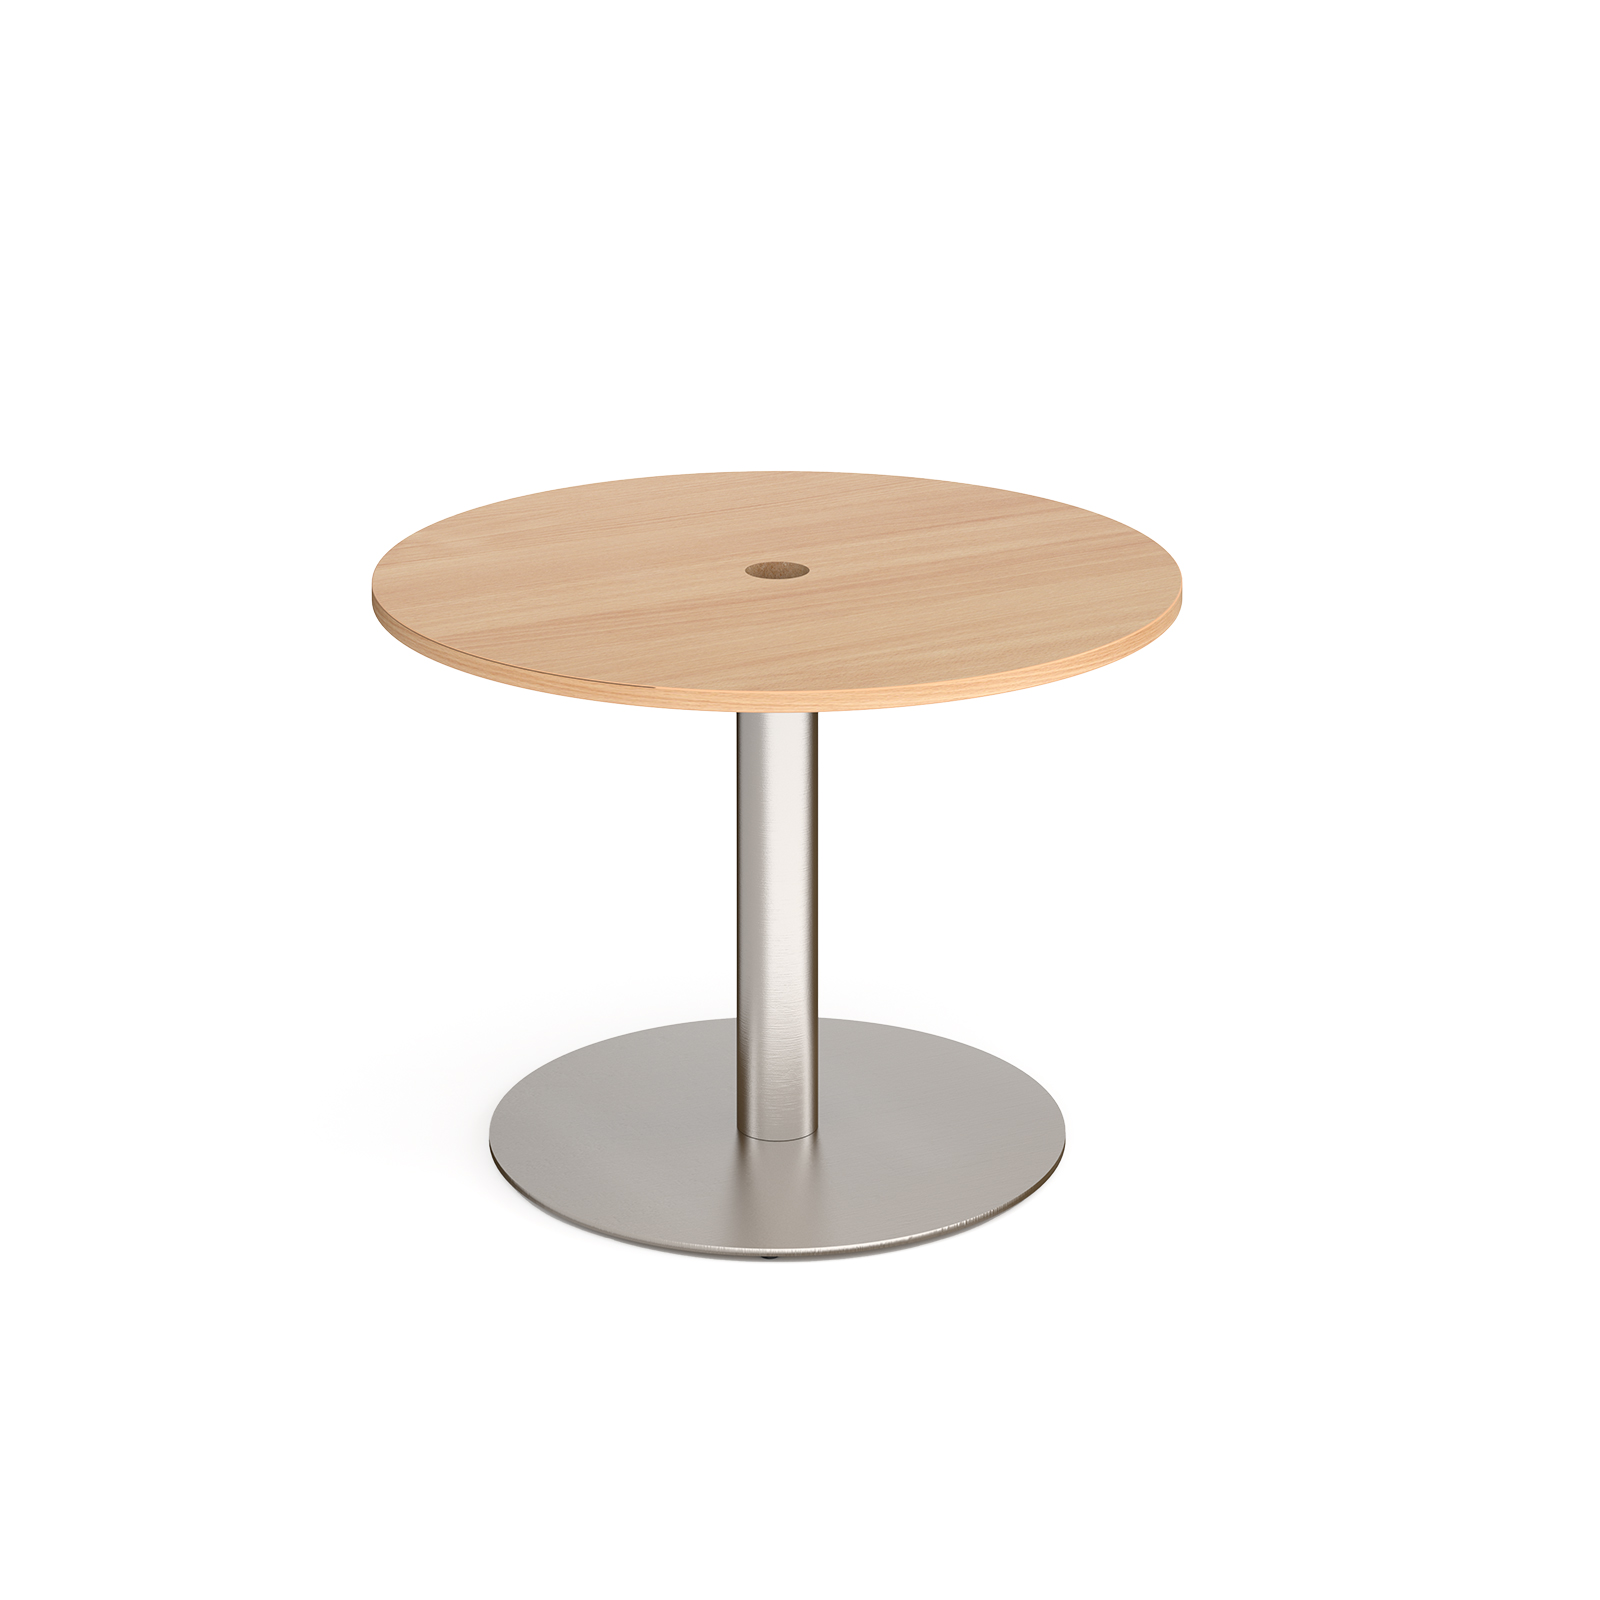 Eternal circular meeting table 1000mm with central circular cutout 80mm - brushed steel base, beech top